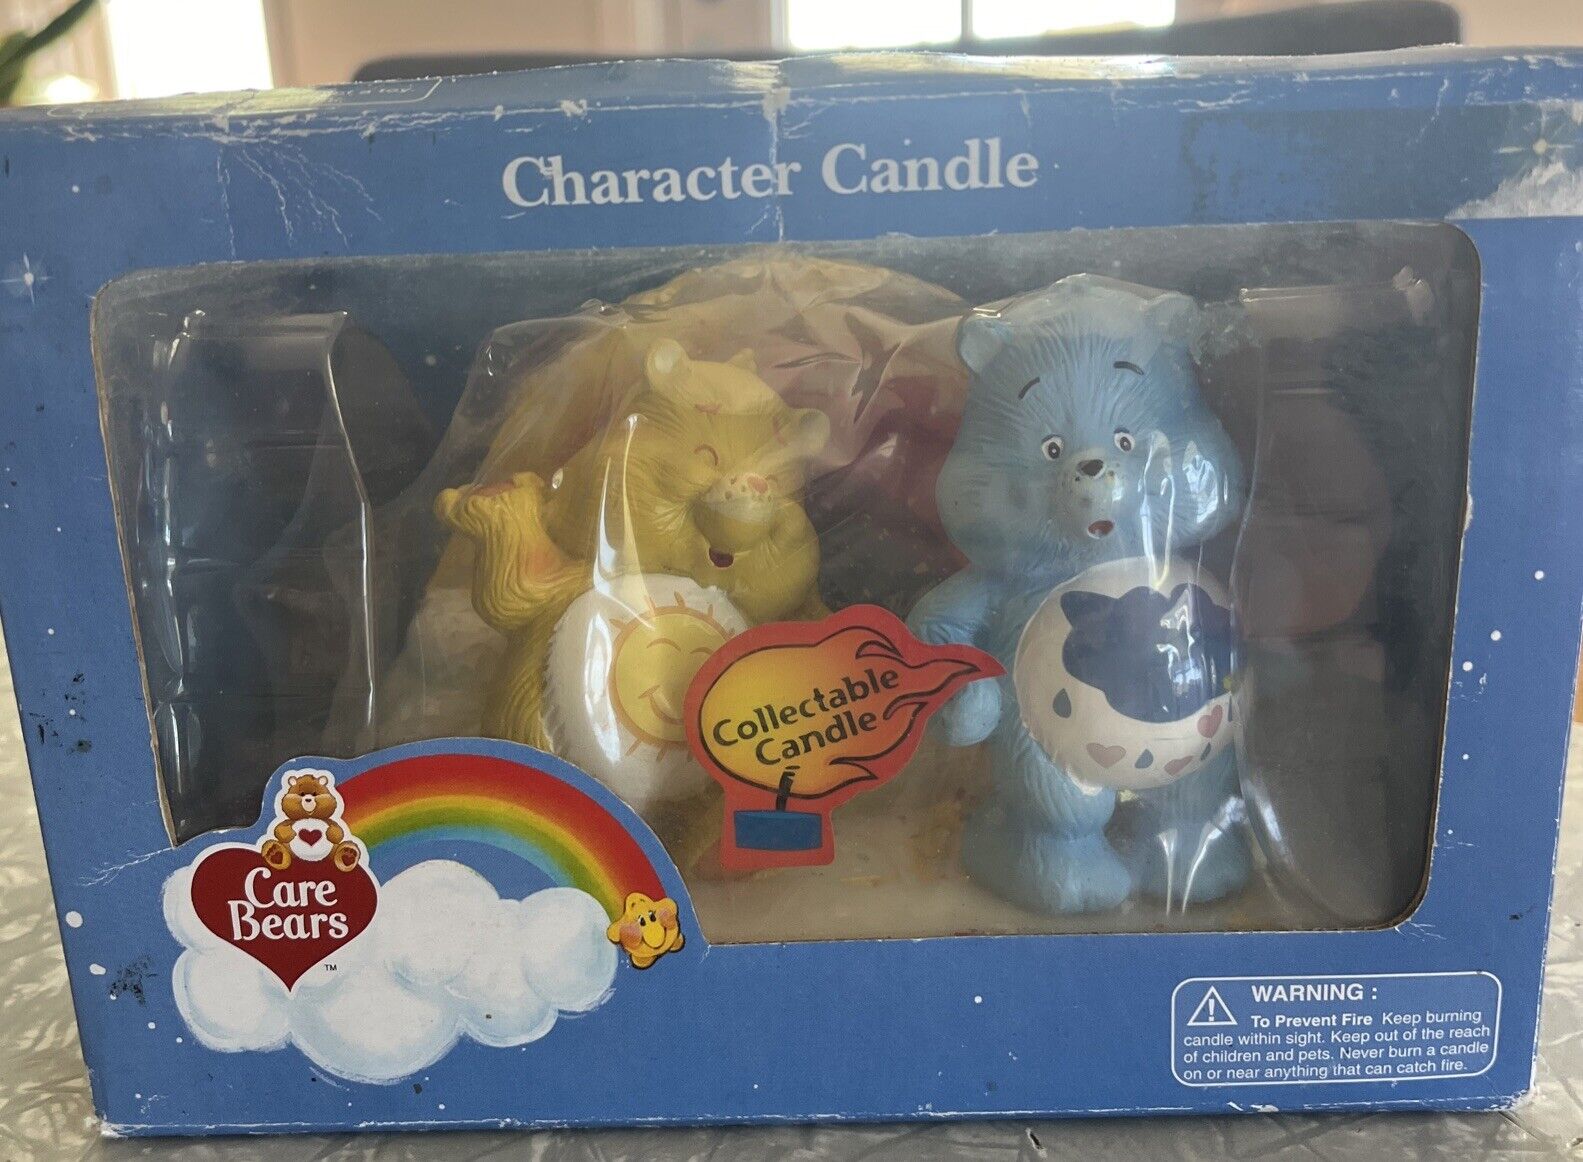 Semi Vintage 2003 Care Bears Collectible Character Candle Set by Fun 4 All